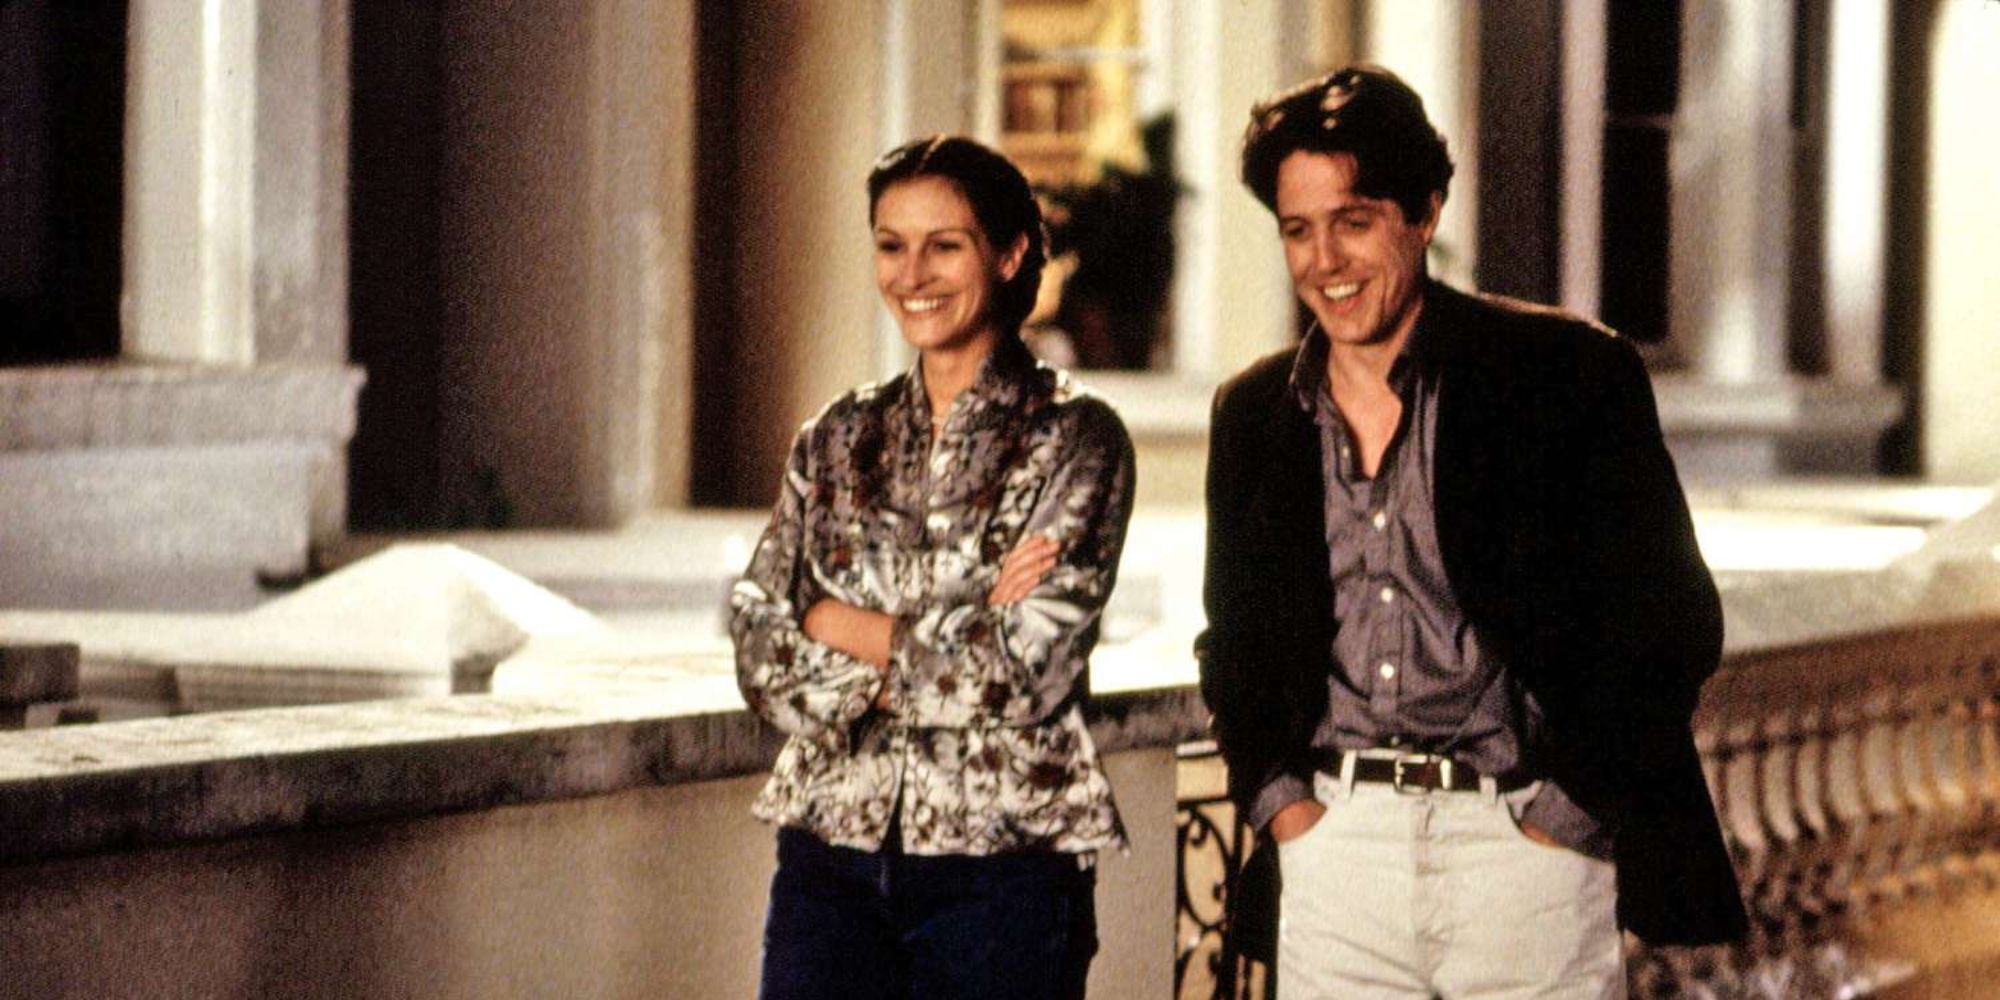 Julia Roberts and Hugh Grant walking down a street together in Notting Hill